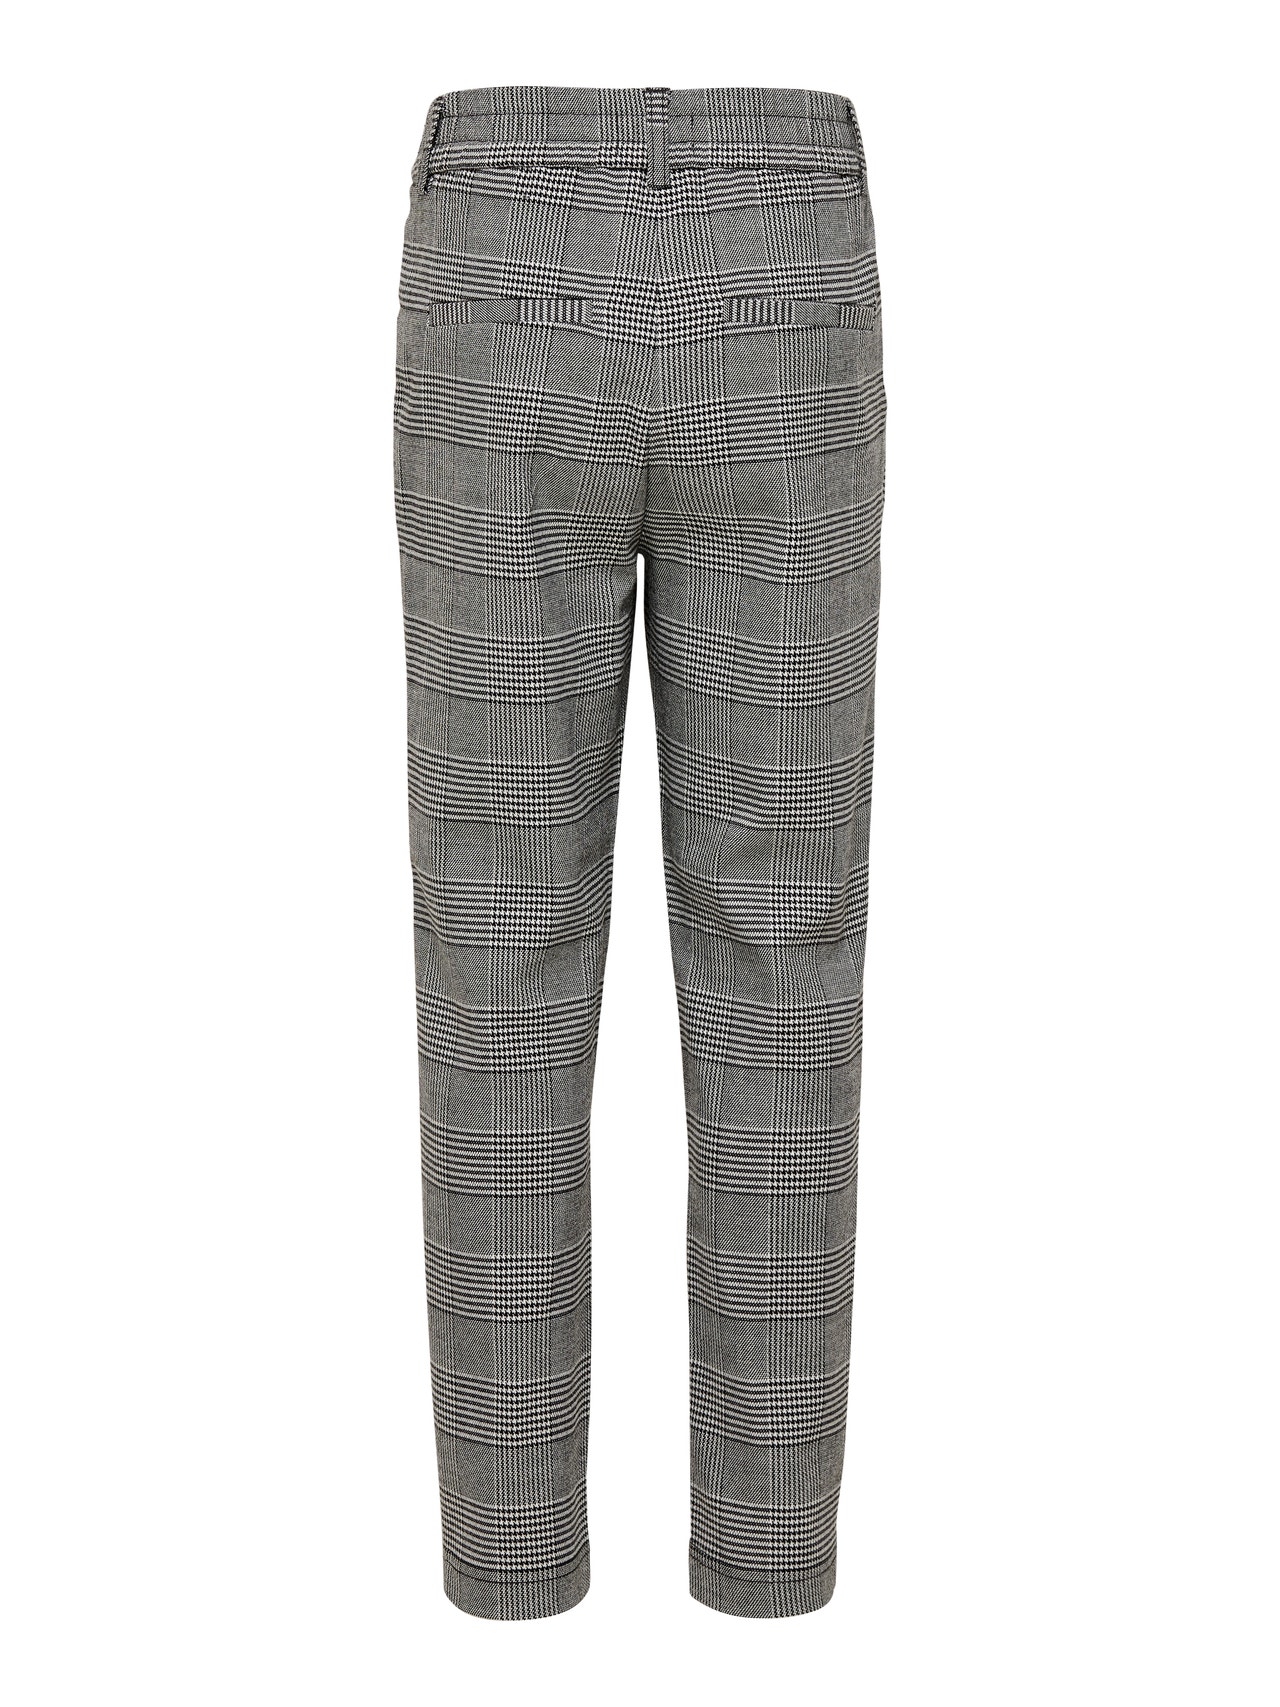 ONLY checked Trousers -Medium Grey Melange - 15183134